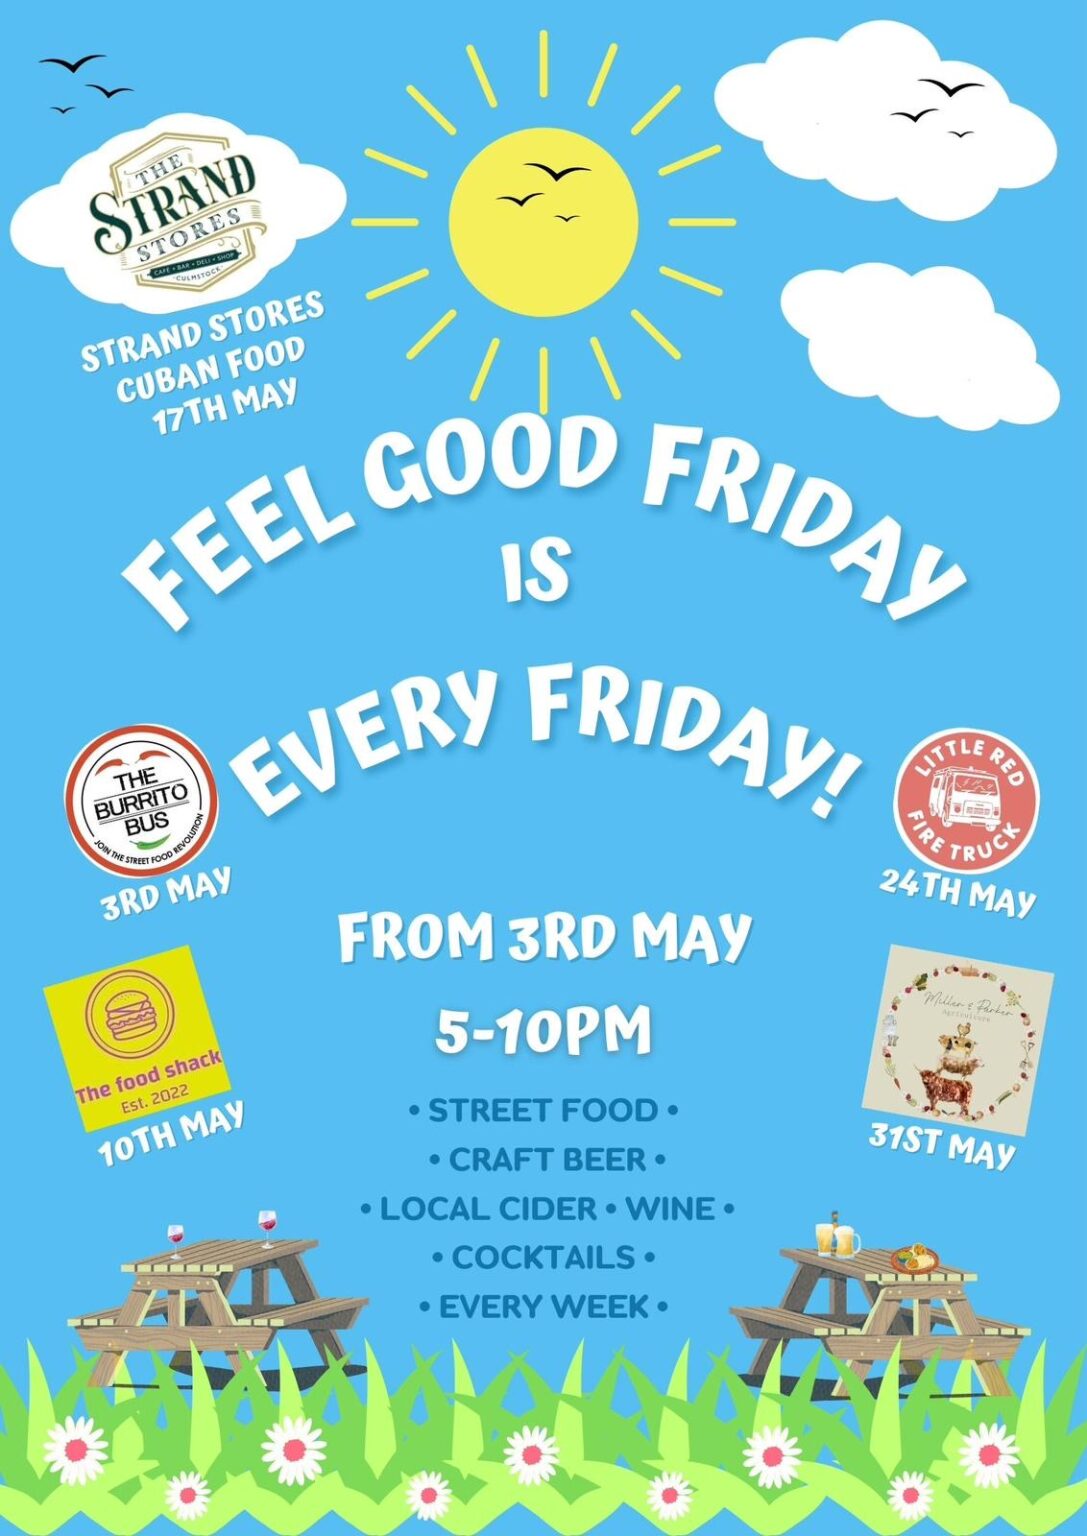 Feel Good Friday at The Strand Stores